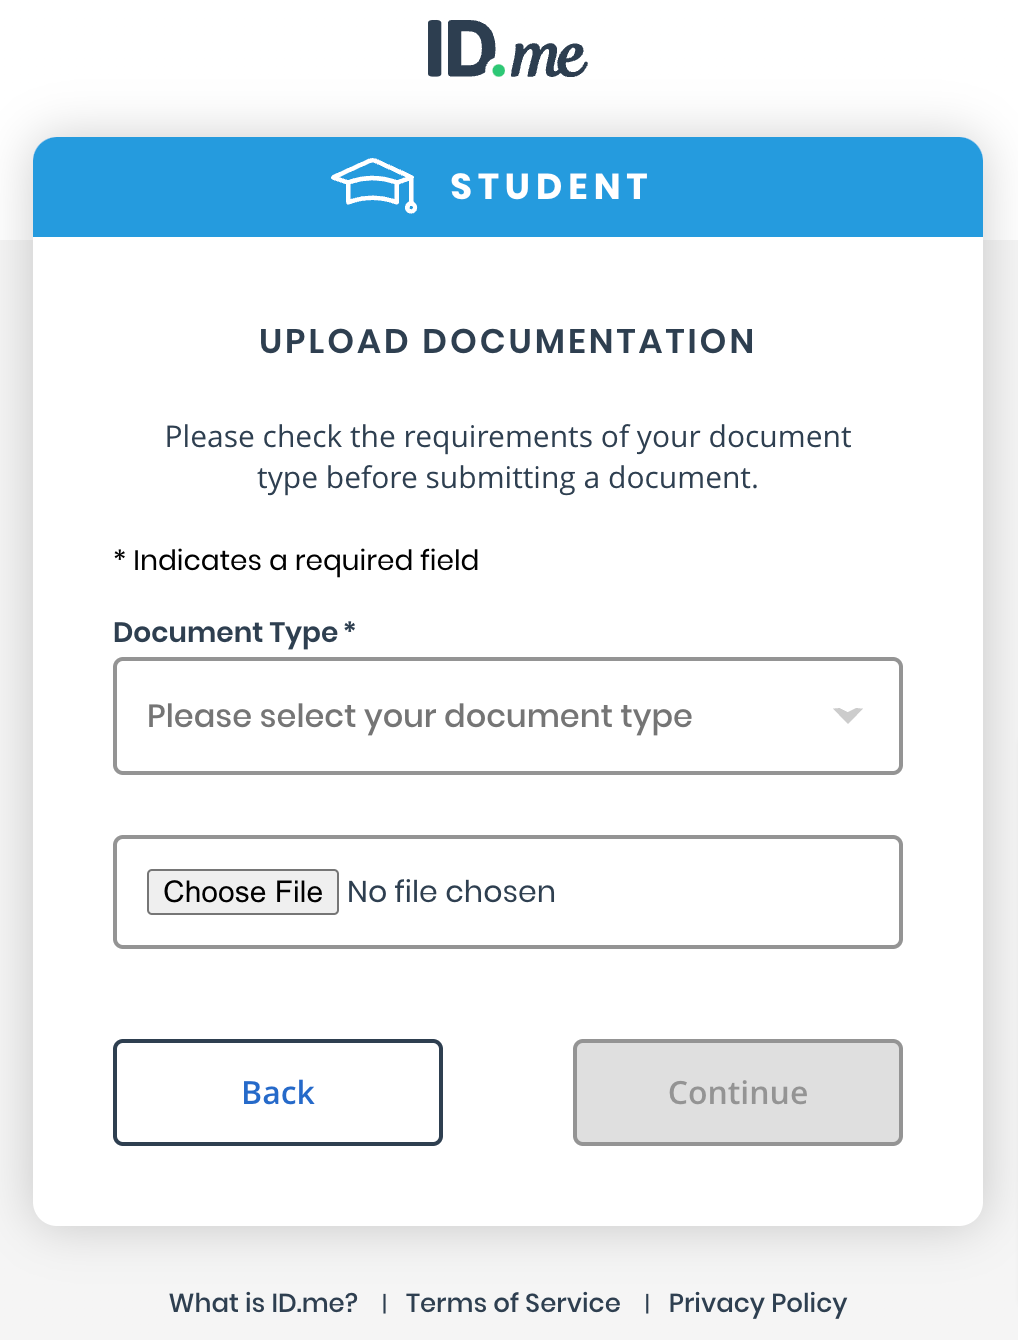 Verifying your student status – ID.me Help Center